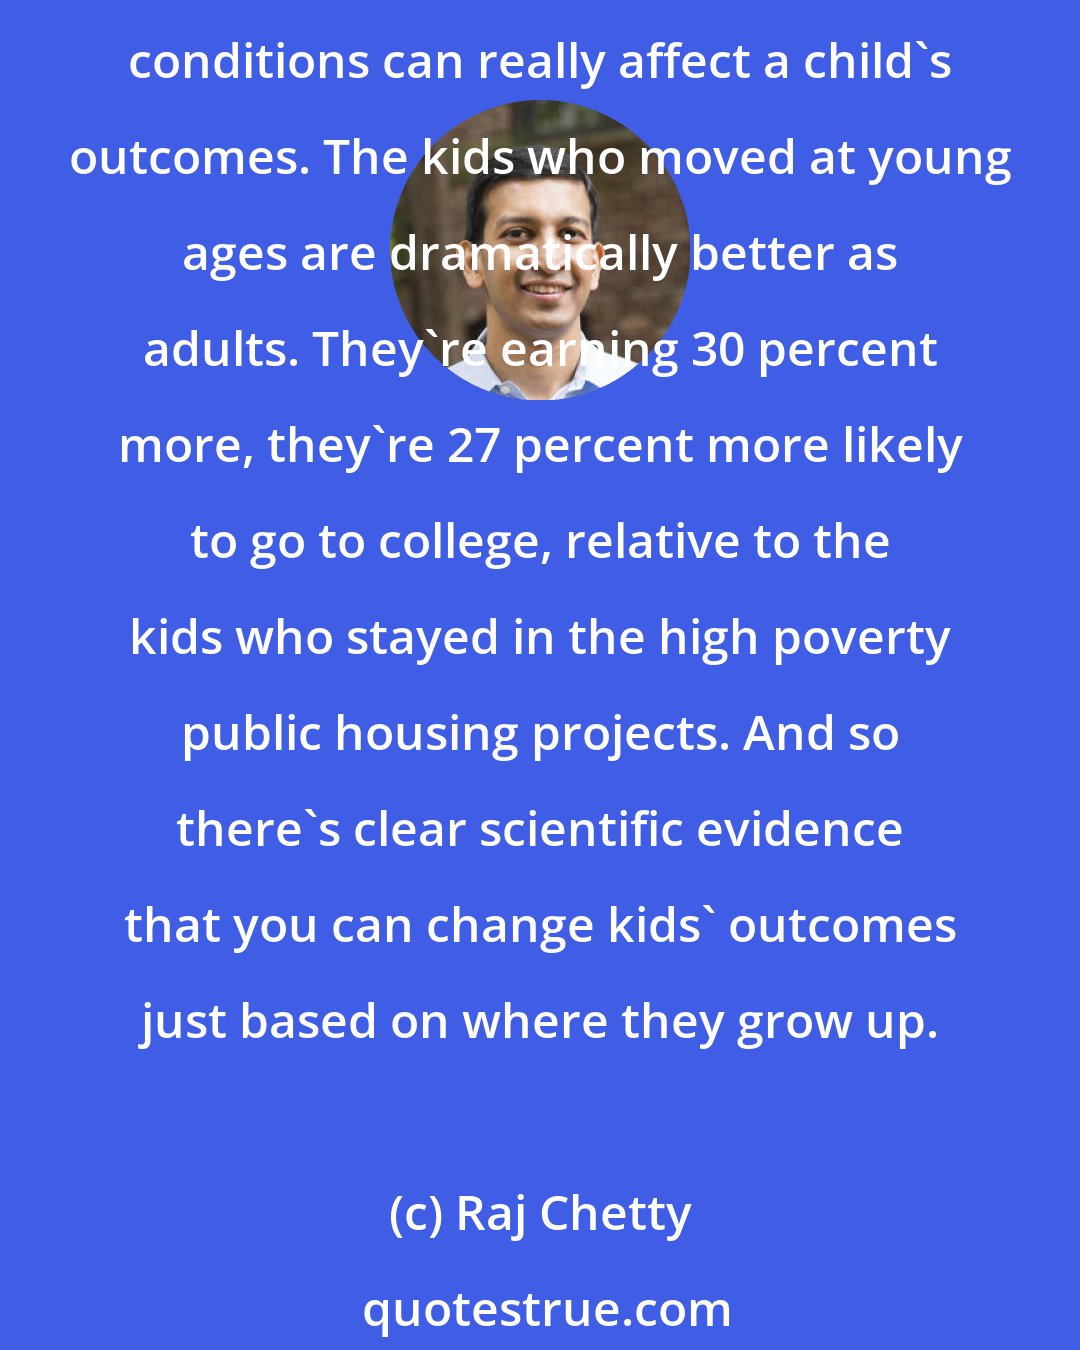 Raj Chetty: There's an evidence from a number of studies which show that where you grow up and the age at which you move to the suburbs or to a neighborhood that in general seems to have better conditions can really affect a child's outcomes. The kids who moved at young ages are dramatically better as adults. They're earning 30 percent more, they're 27 percent more likely to go to college, relative to the kids who stayed in the high poverty public housing projects. And so there's clear scientific evidence that you can change kids' outcomes just based on where they grow up.